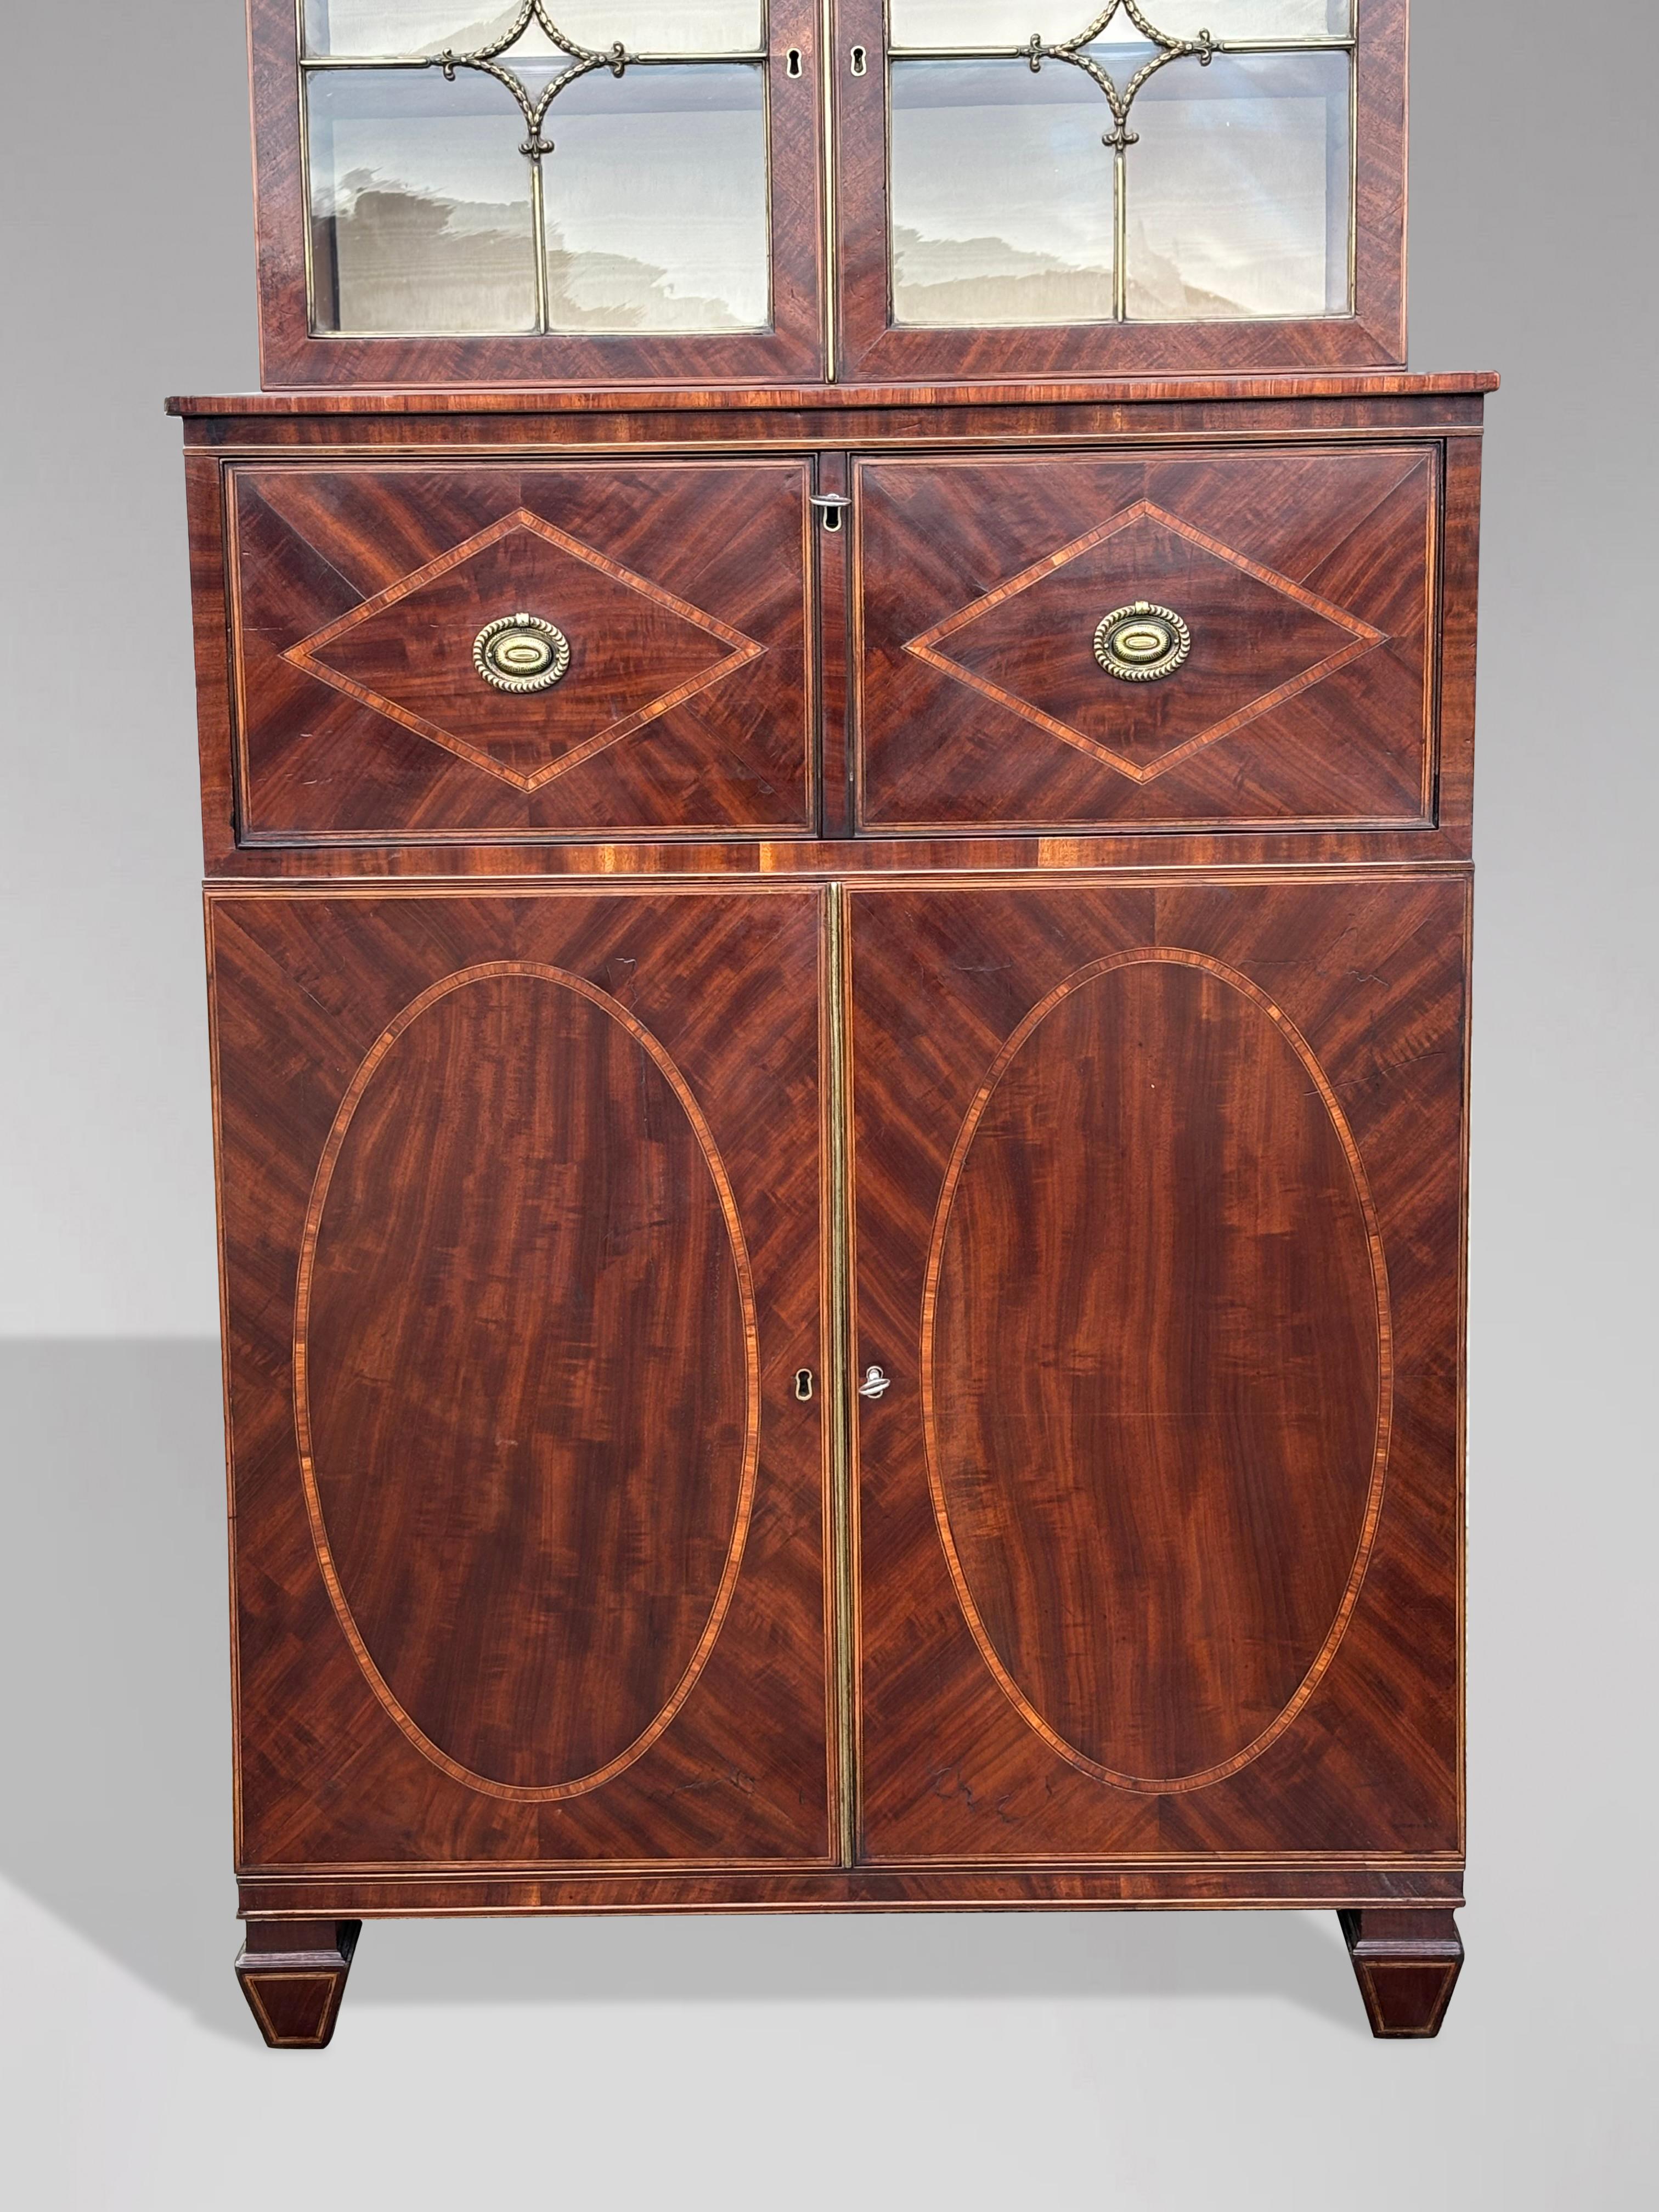 Early 19th Century Regency Period Mahogany Secretaire Bookcase In Good Condition For Sale In Petworth,West Sussex, GB